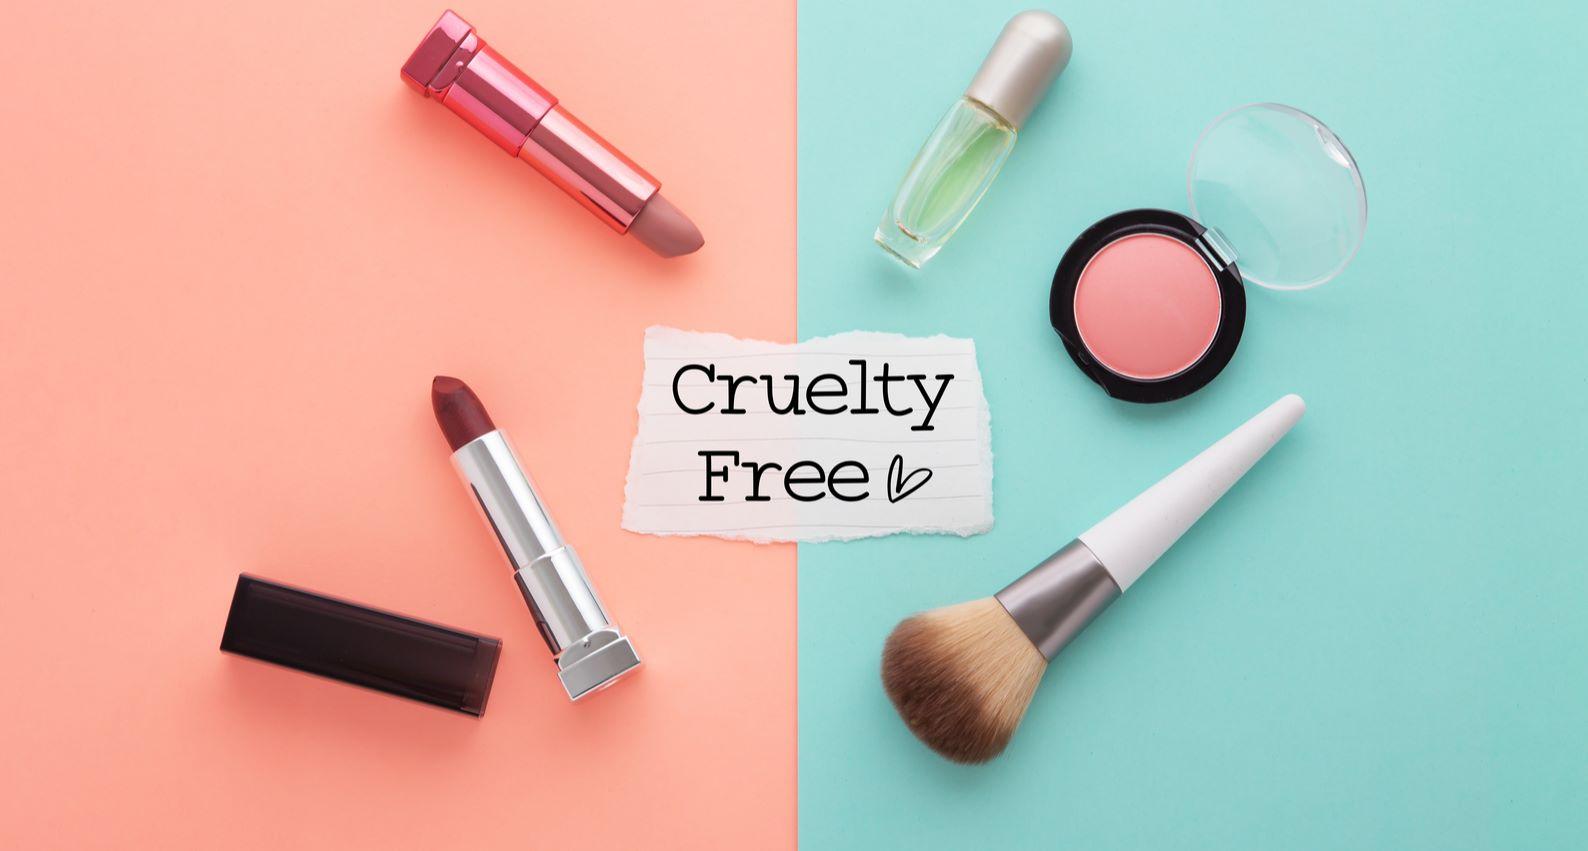 Vegan Beauty Products A Rising Trend